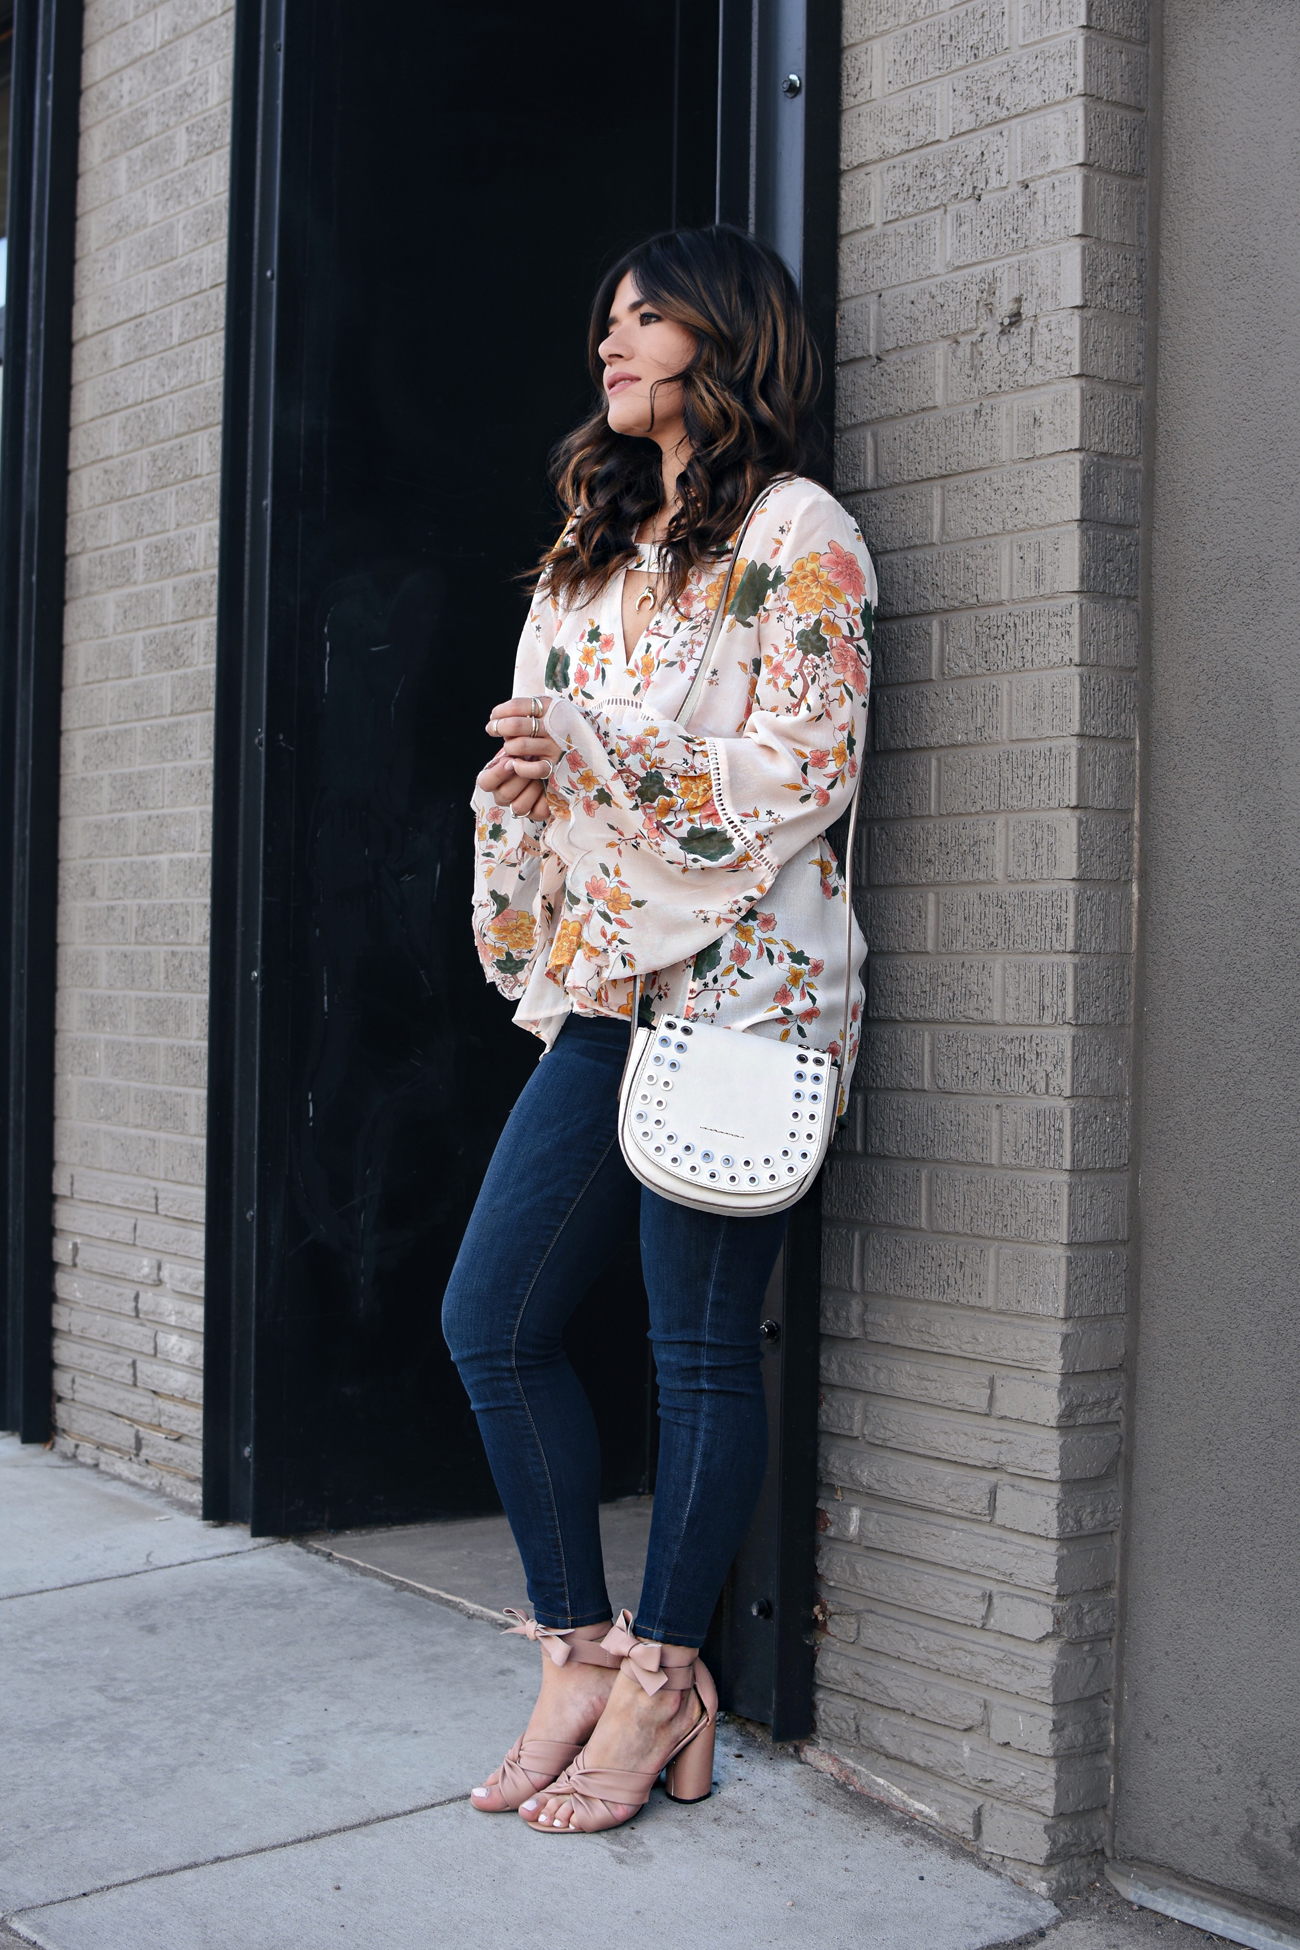 Carolina Hellal of Chic Talk wearing a Floral top, Paige skinny jeans, topshop blush sandals, and Frye white crossbody bag 